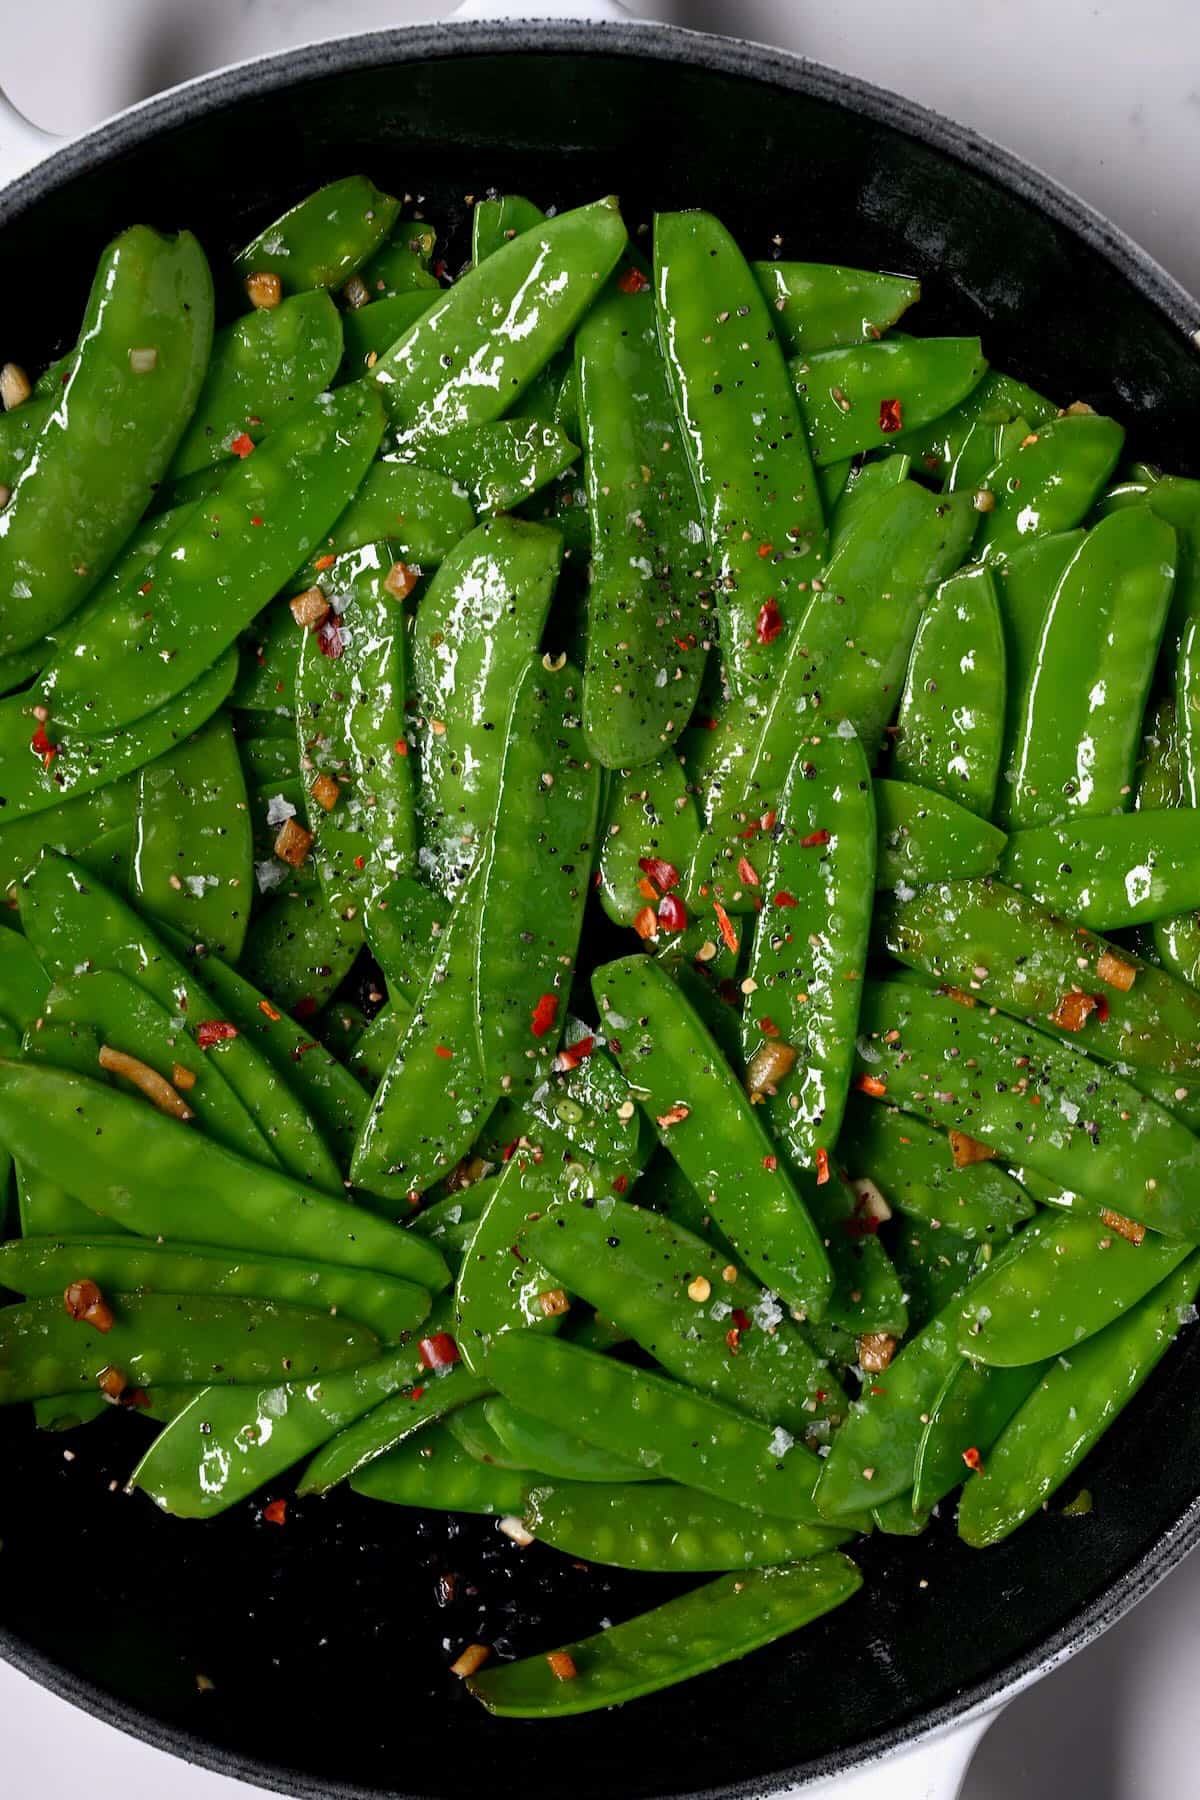 Sautéed snow peas topped with chili flakes